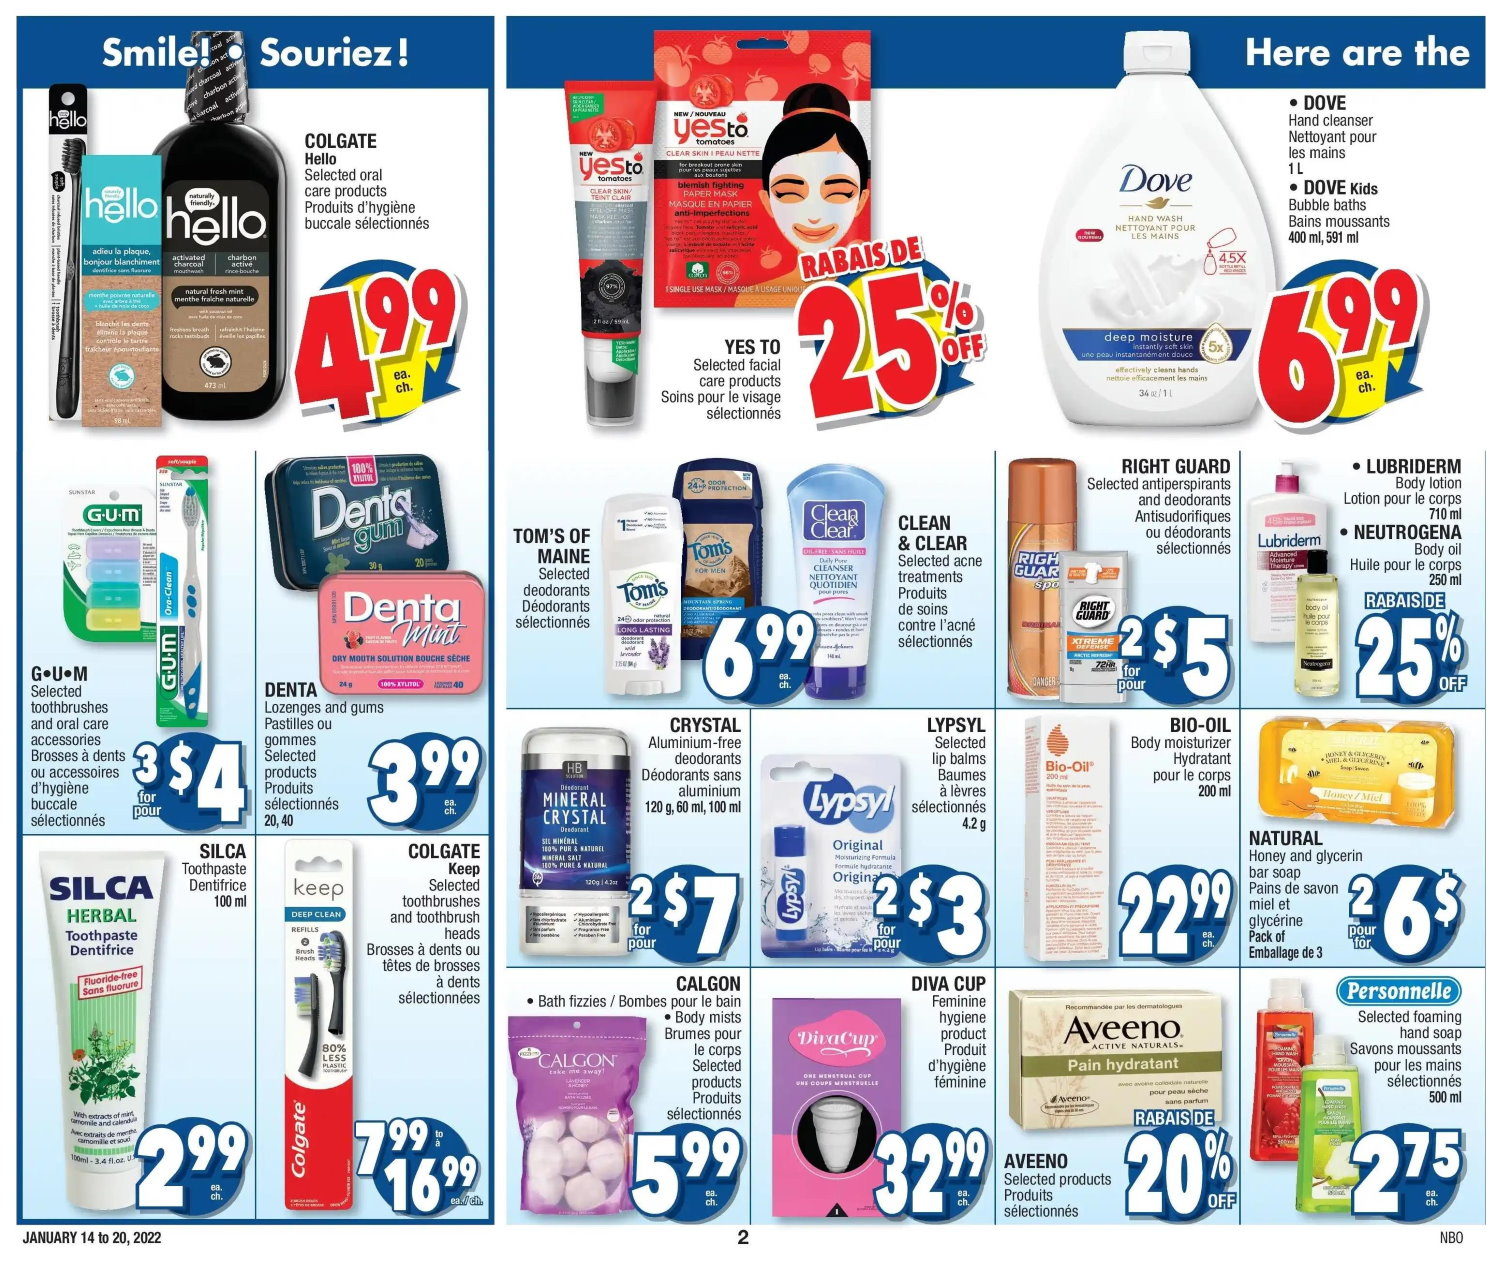 Jean Coutu - Even More Savings - Weekly Flyer Specials - Page 2